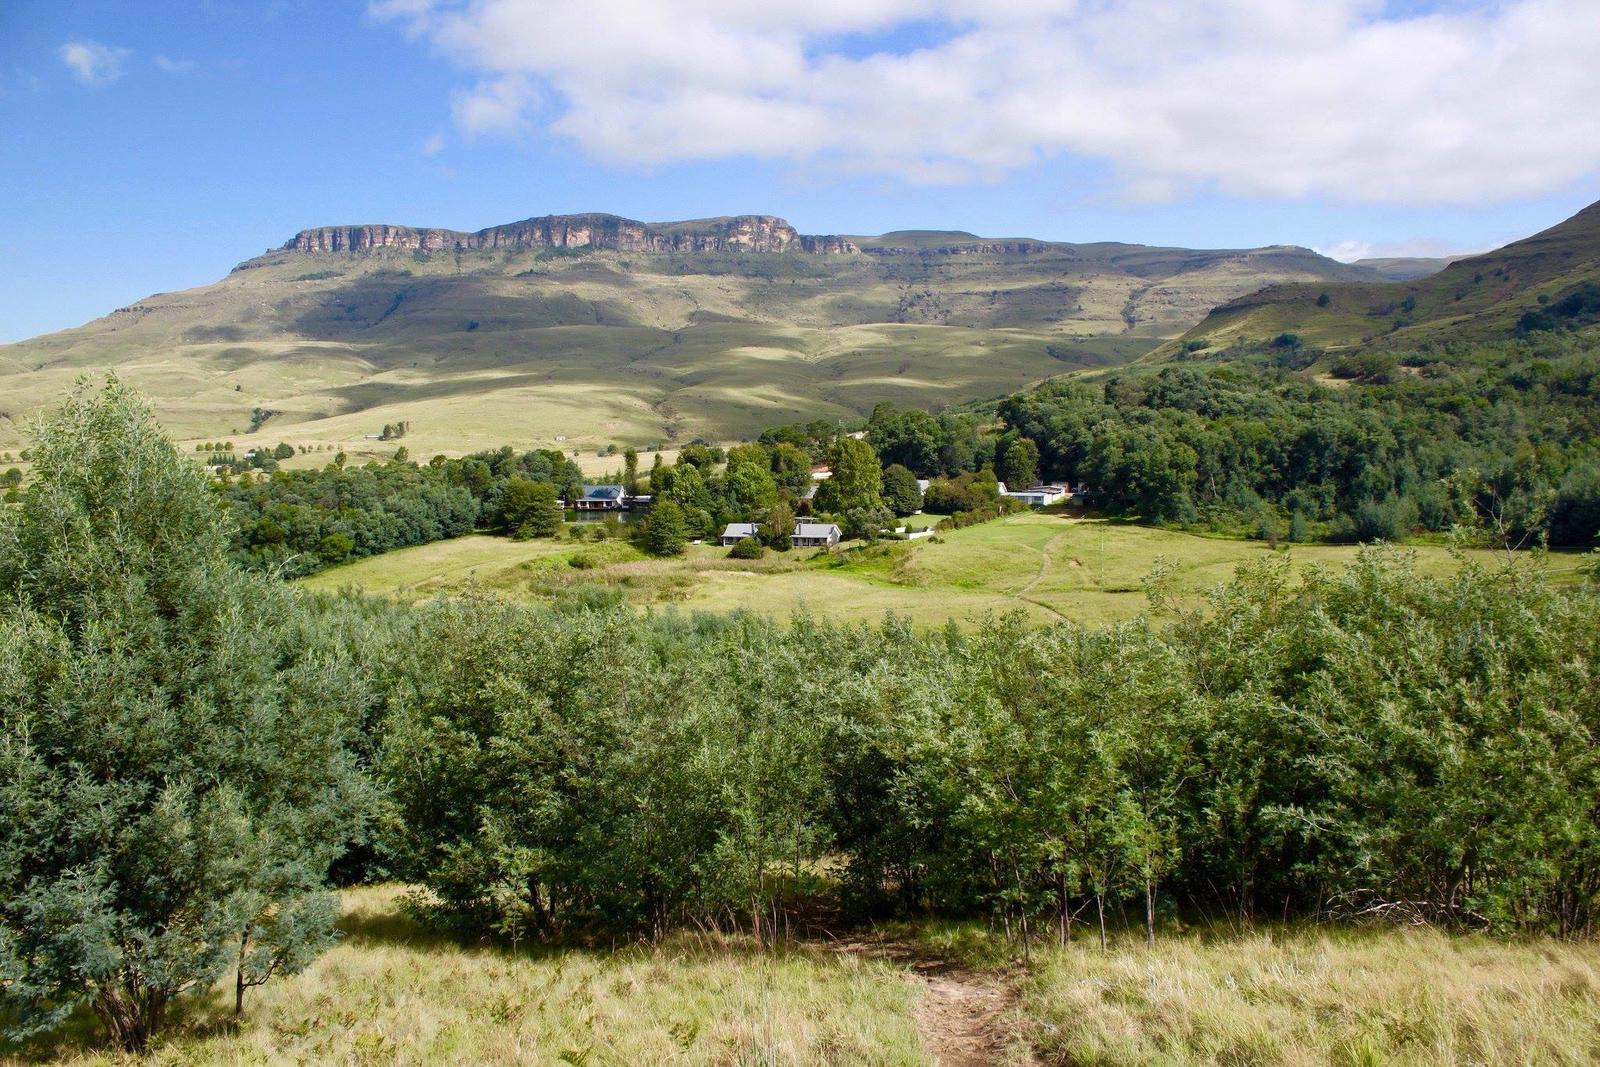 Kamberg Nature Reserve Accommodation  Find Your Perfect Lodging,  Self-Catering, or Bed and Breakfast and Book Today!